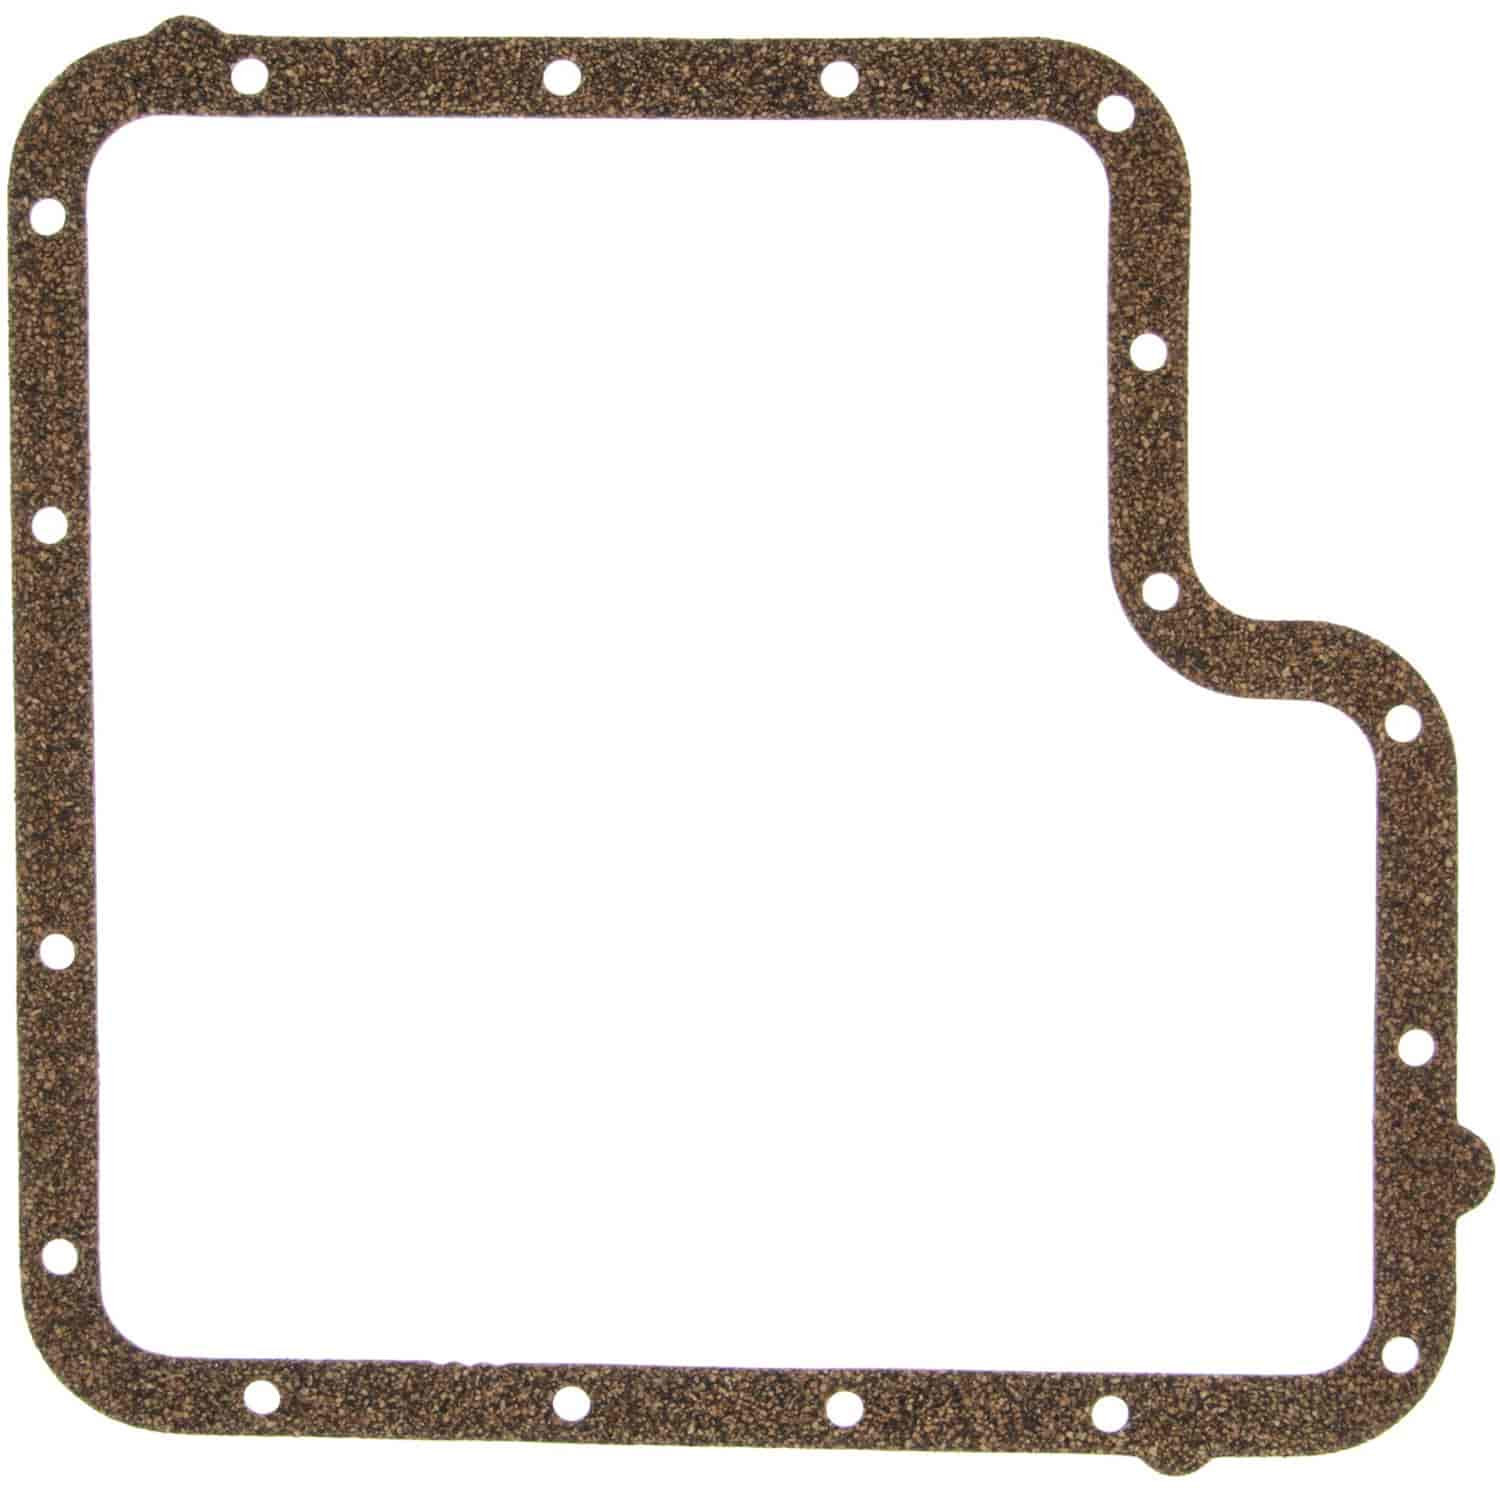 Automatic Transmission Gasket 1966-1996 Ford C6 Auto in Cork-Rubber